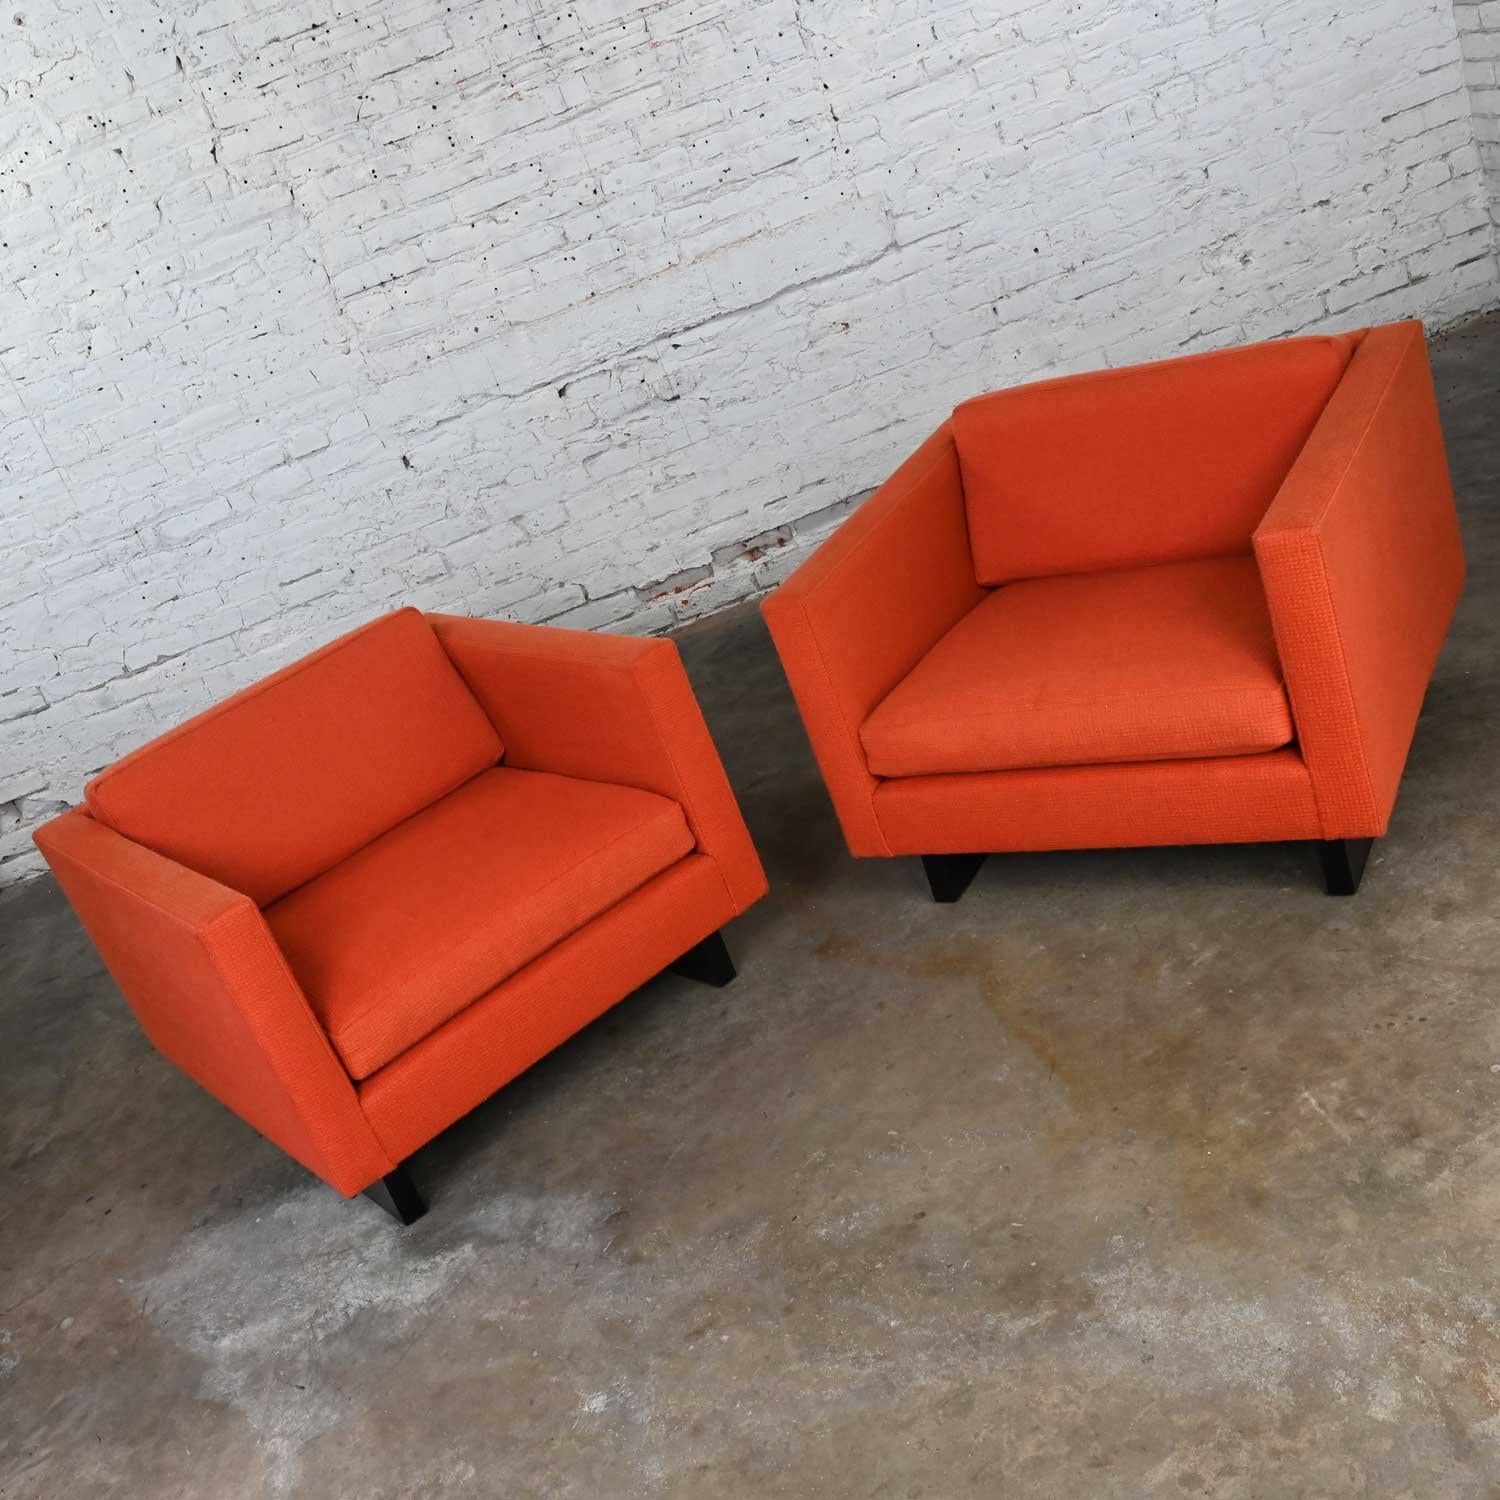 American 1970s Mcm to Modern Harvey Probber Club Chairs Orange 1571 Tuxedo Sleigh Bases For Sale